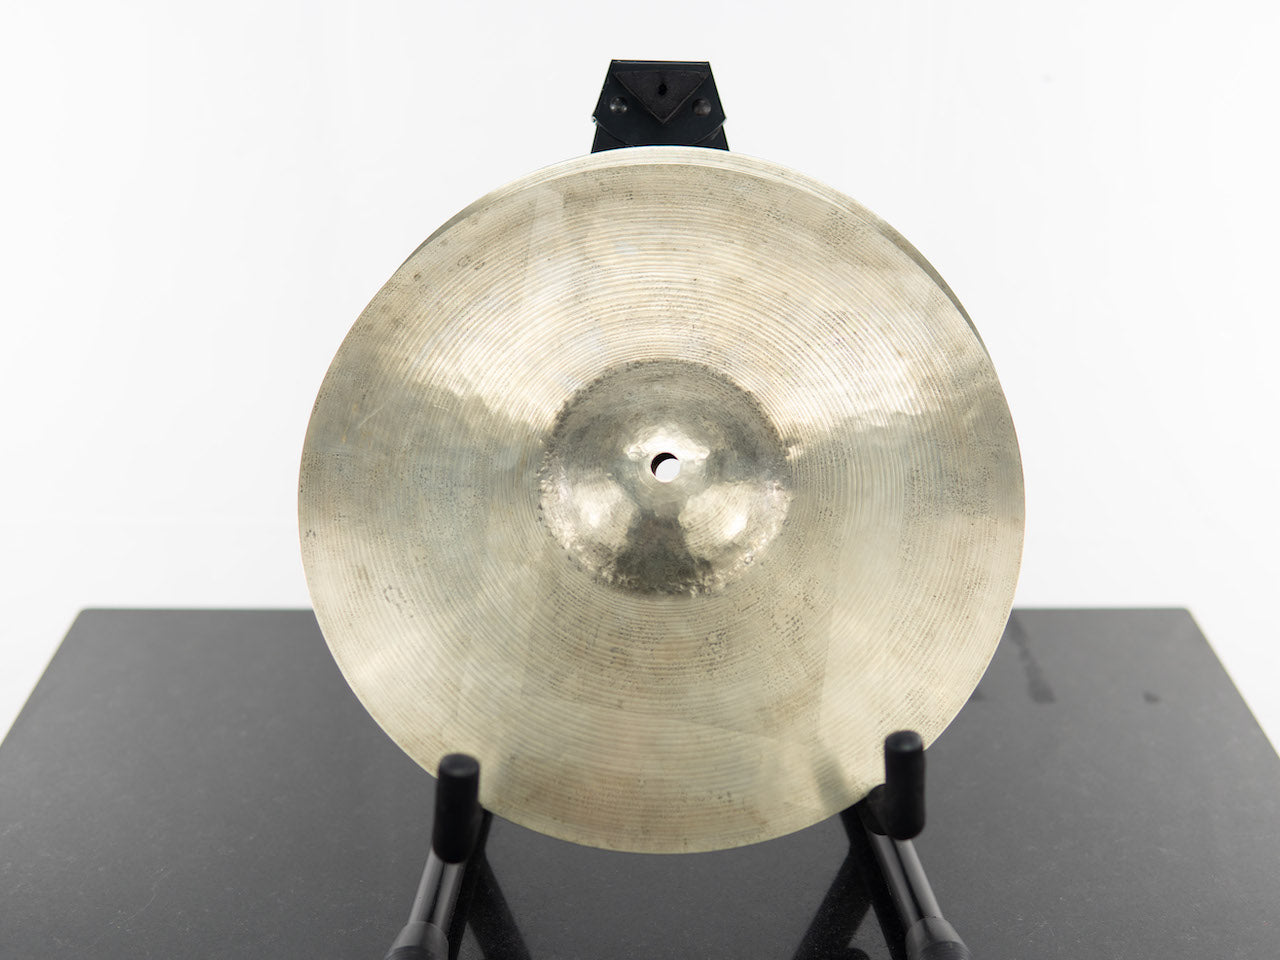 Ludwig Standard Re-Hammered 13" Hi-hat Cymbals - Made by Paiste 1958-60